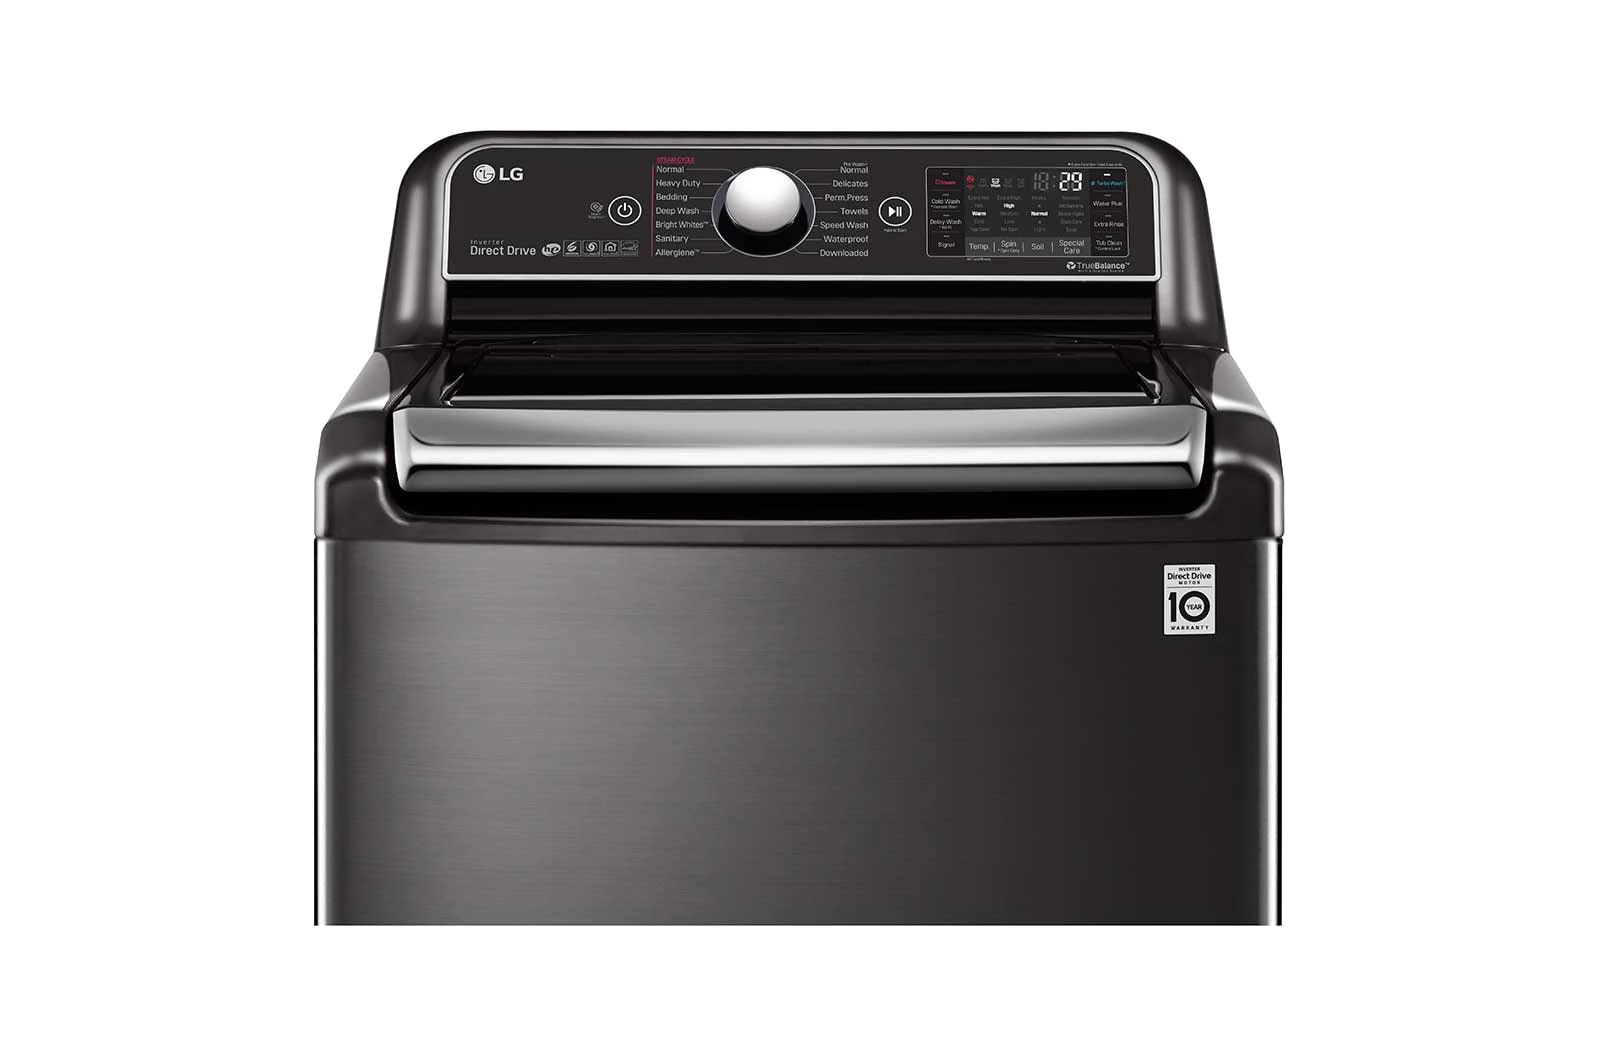 LG - 6.3 cu. Ft  Top Load Washer in Black Stainless - WT7900HBA